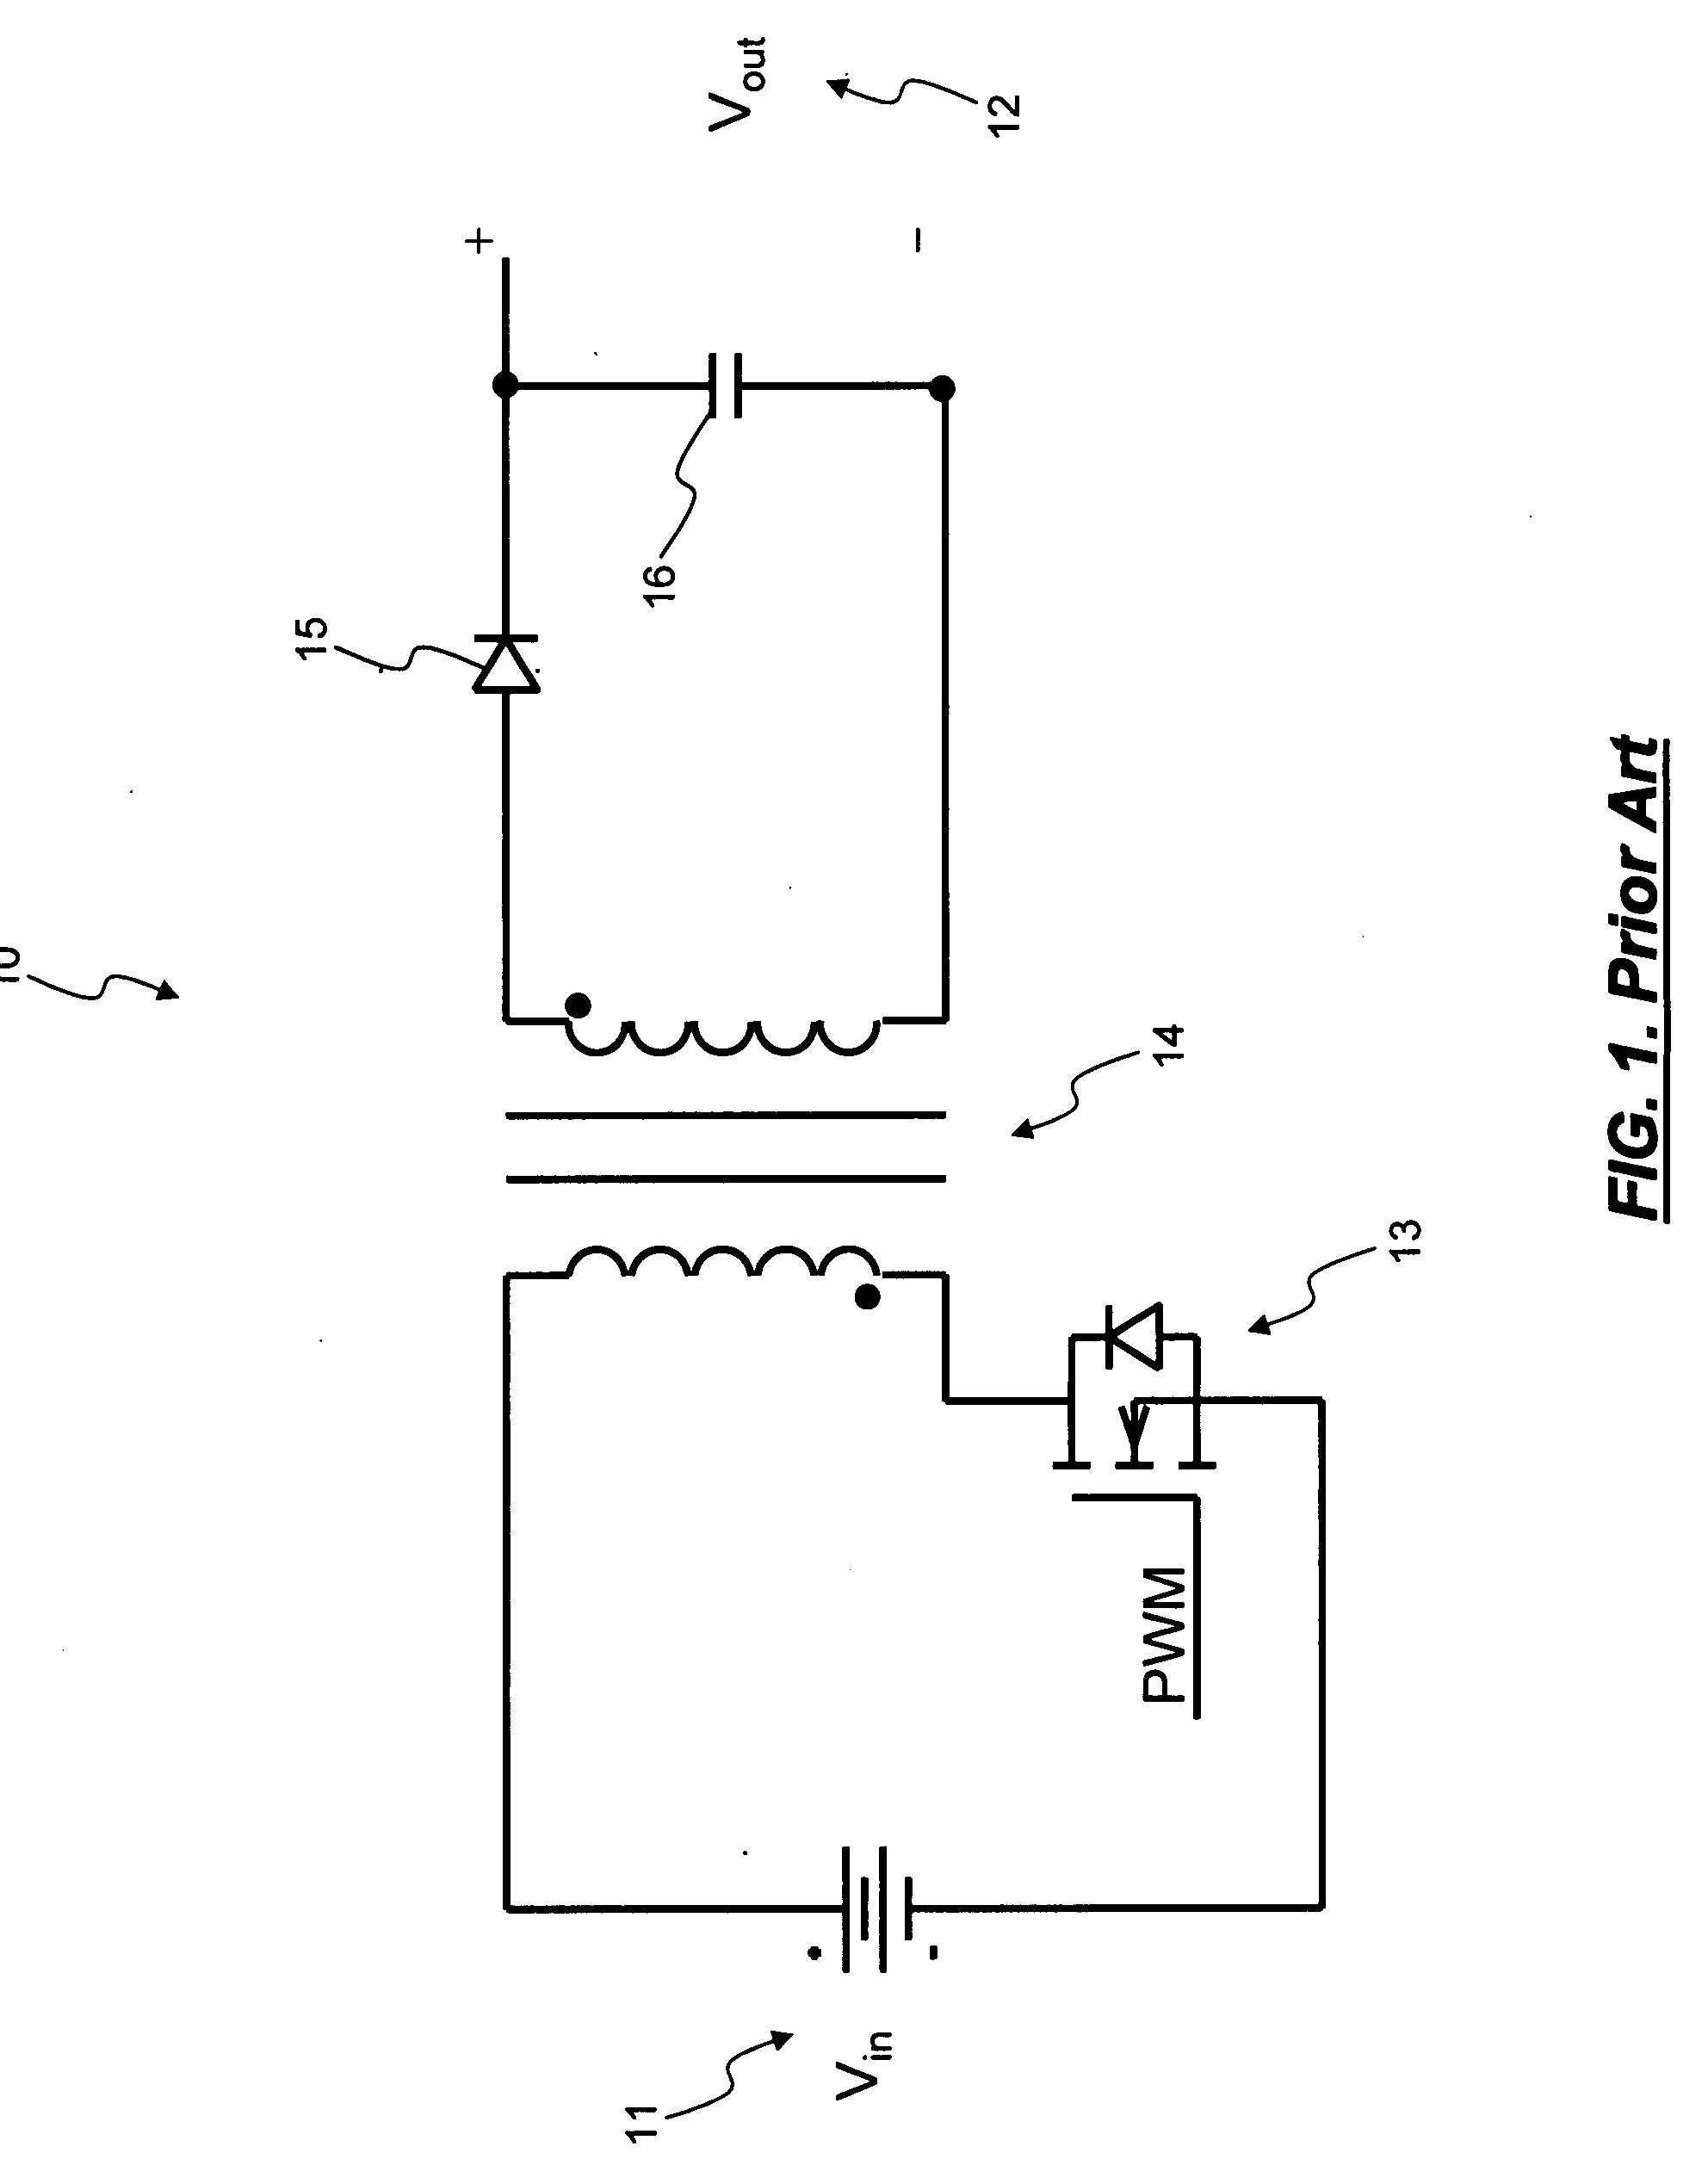 Flyback converter providing simplified control of rectifier MOSFETS when utilizing both stacked secondary windings and synchronous rectification